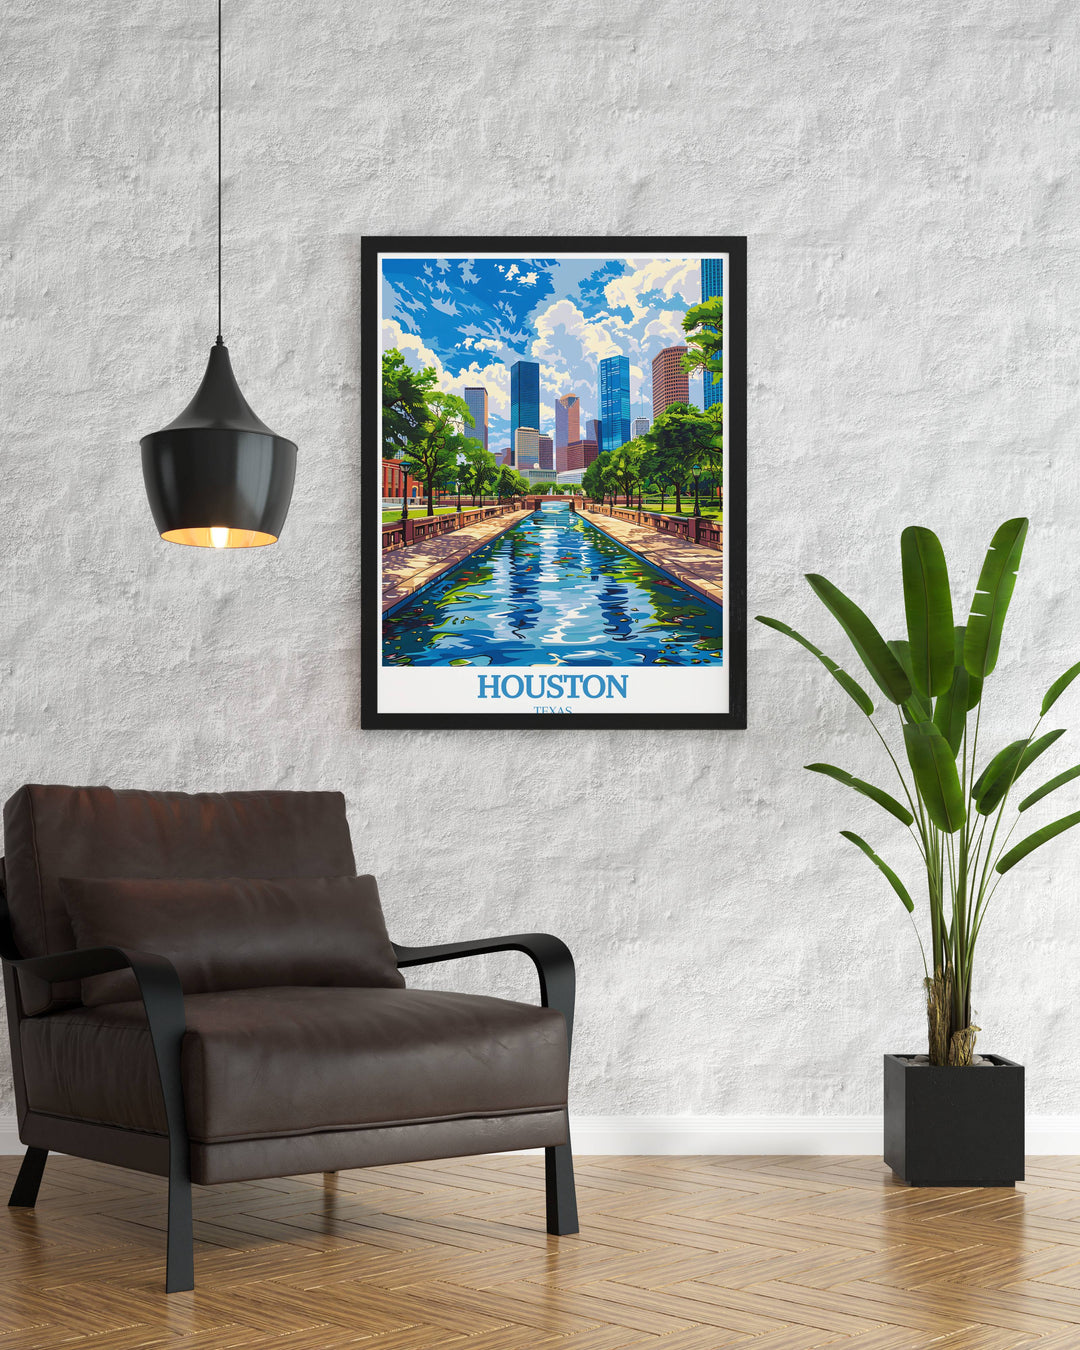 Elegant wall art of Houstons cityscape at night; the lights illuminating buildings and streets vividly capture the citys lively ambiance, making it a striking addition to any room decor.